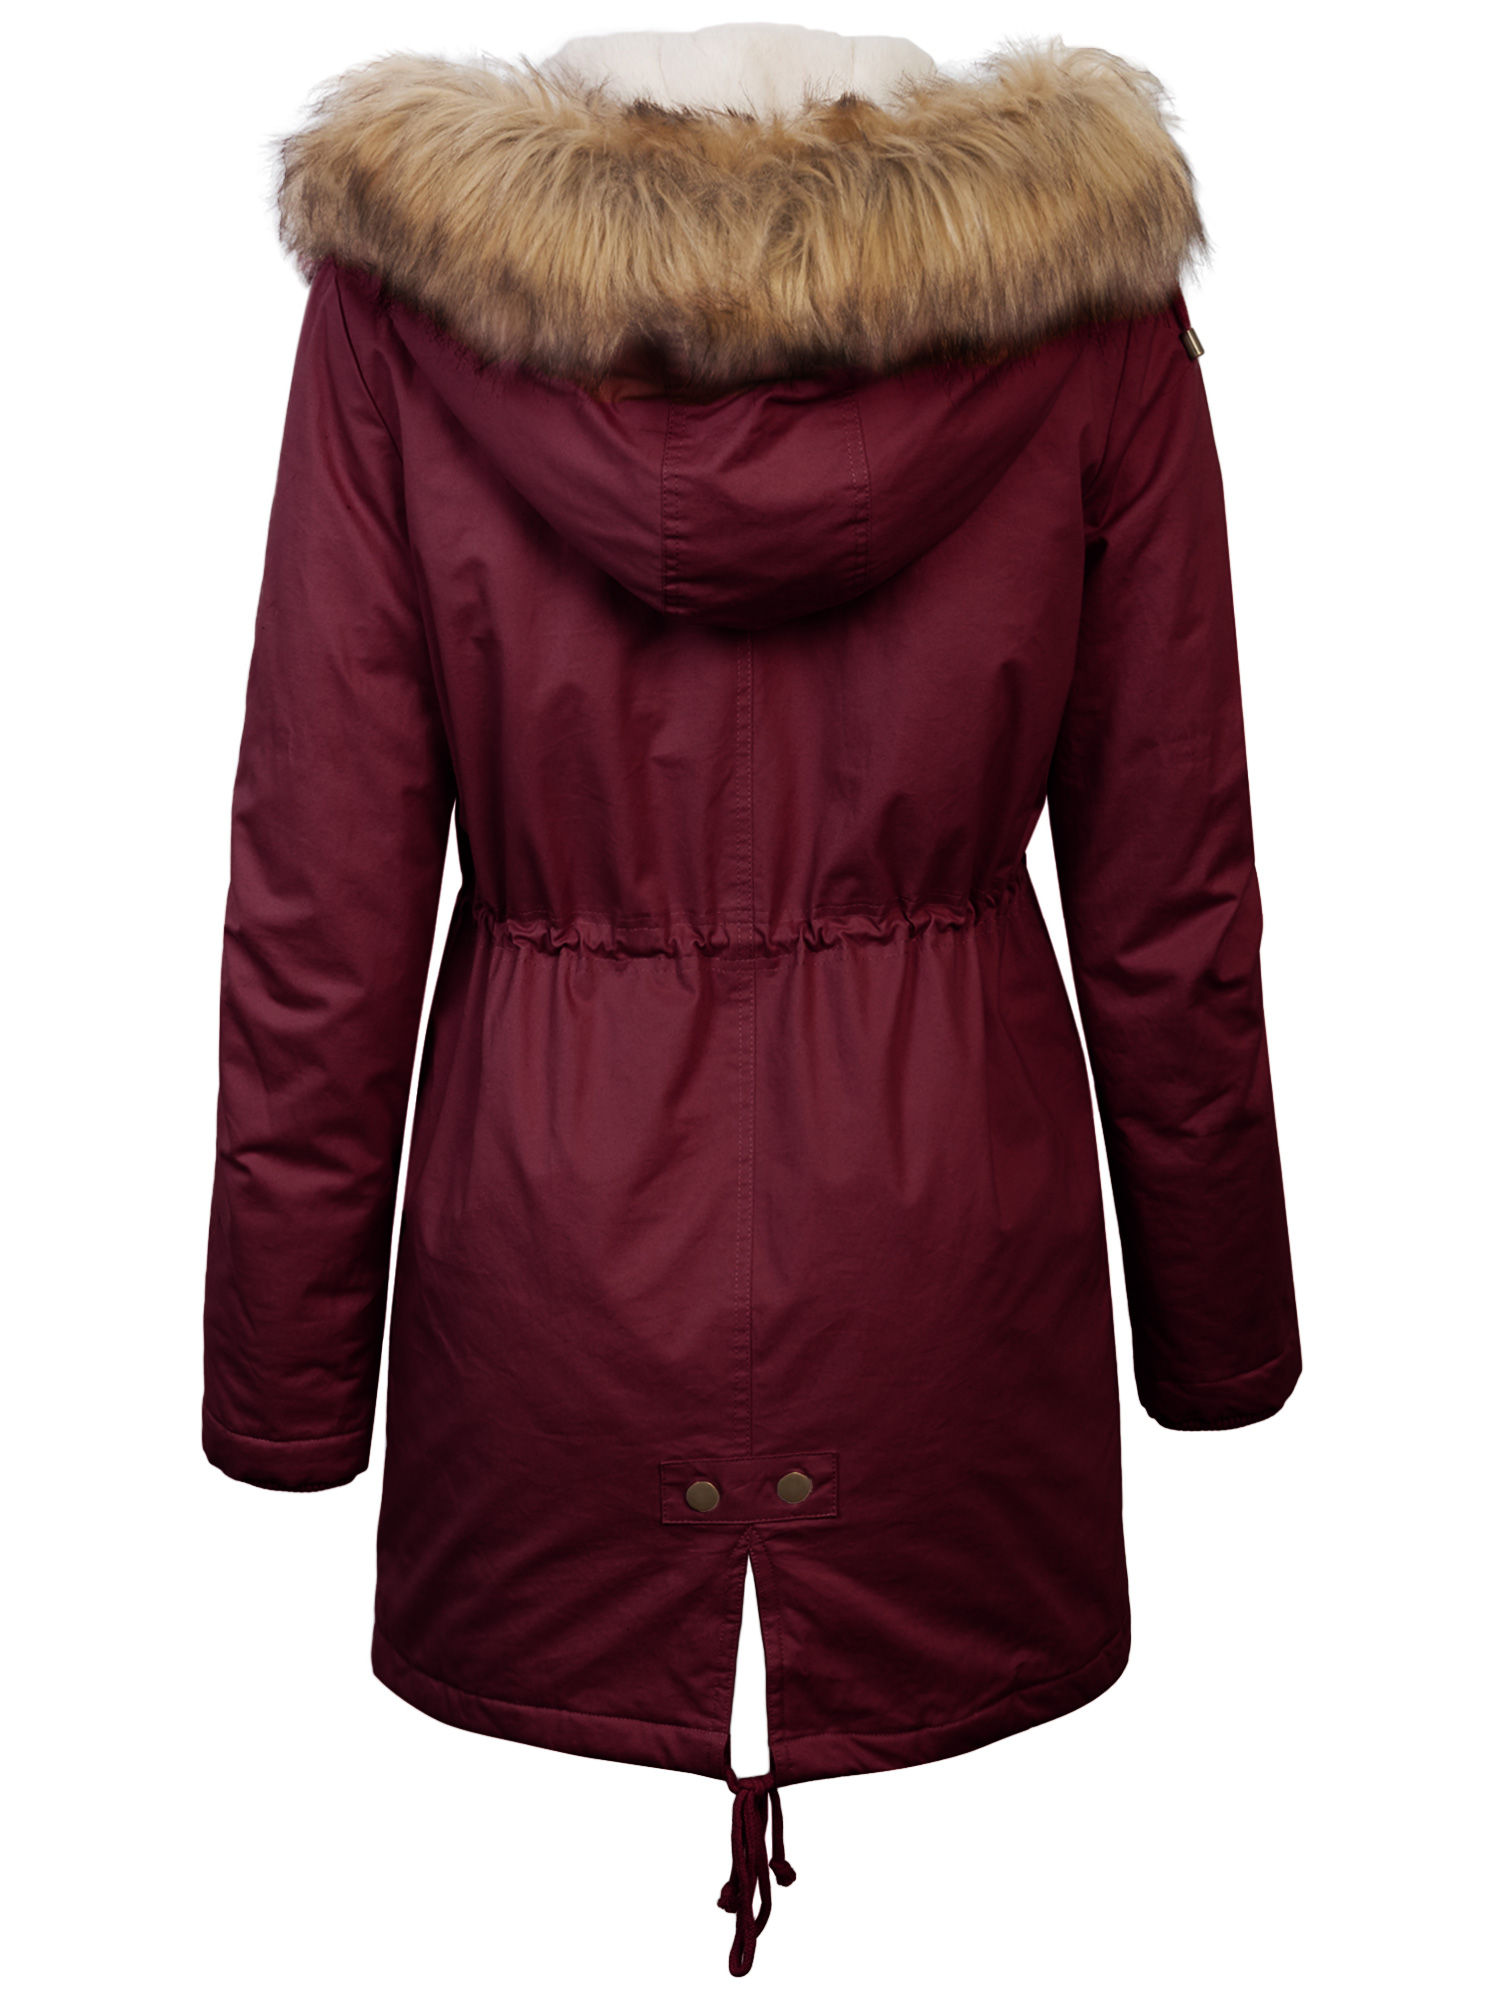 KOGMO Womens Long Anorak Coat Fur Trim Hoodie Jacket with Fuax Fur Lined - image 3 of 9